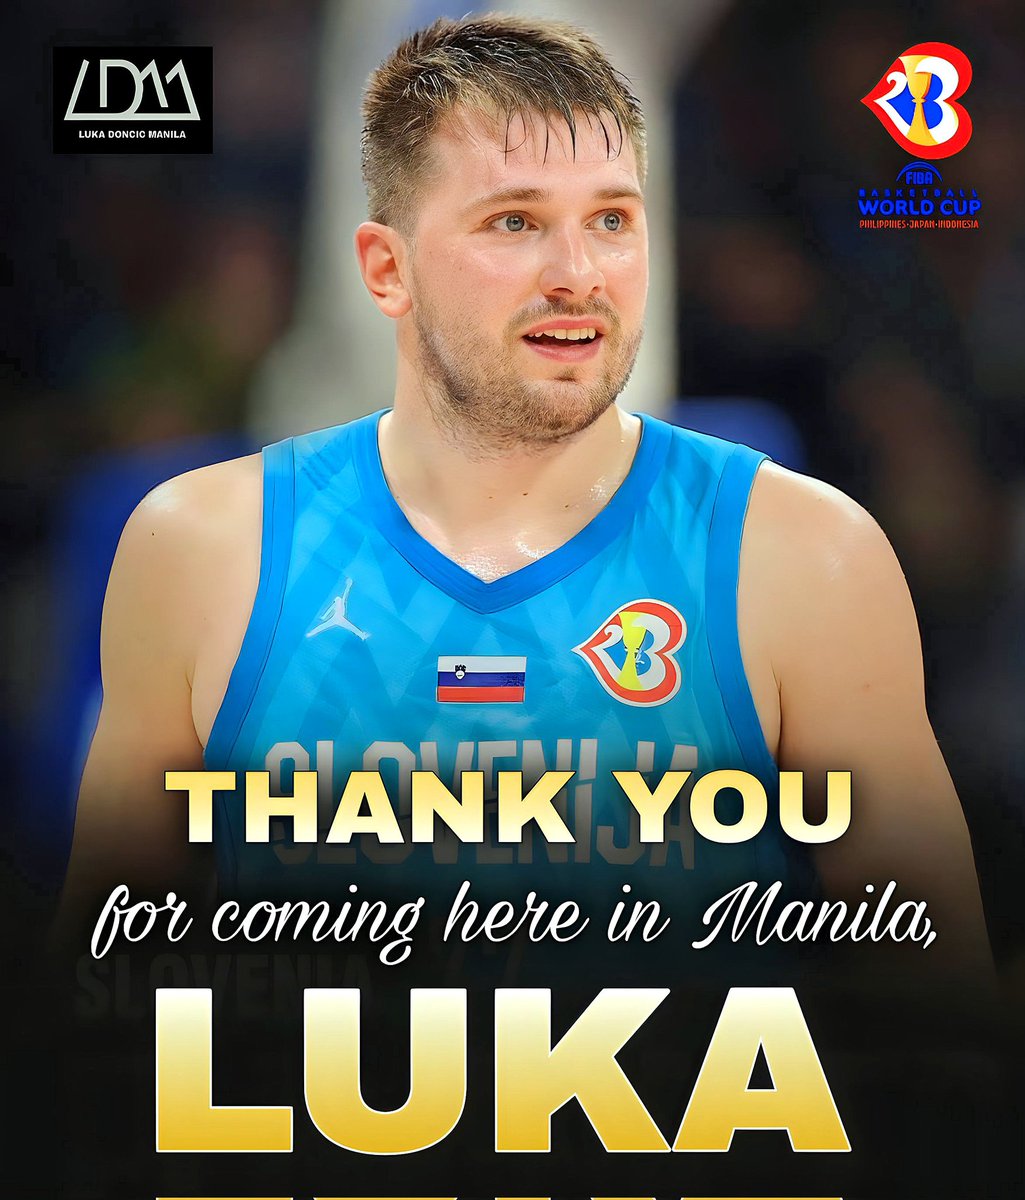 Thank you, Luka.❤️ See you next time! 🥹

We wish you all the best on your next journey!

#FIBA #FIBAWorldCup #FIBA2023 #FIBAWC2023 #FIBABasketball